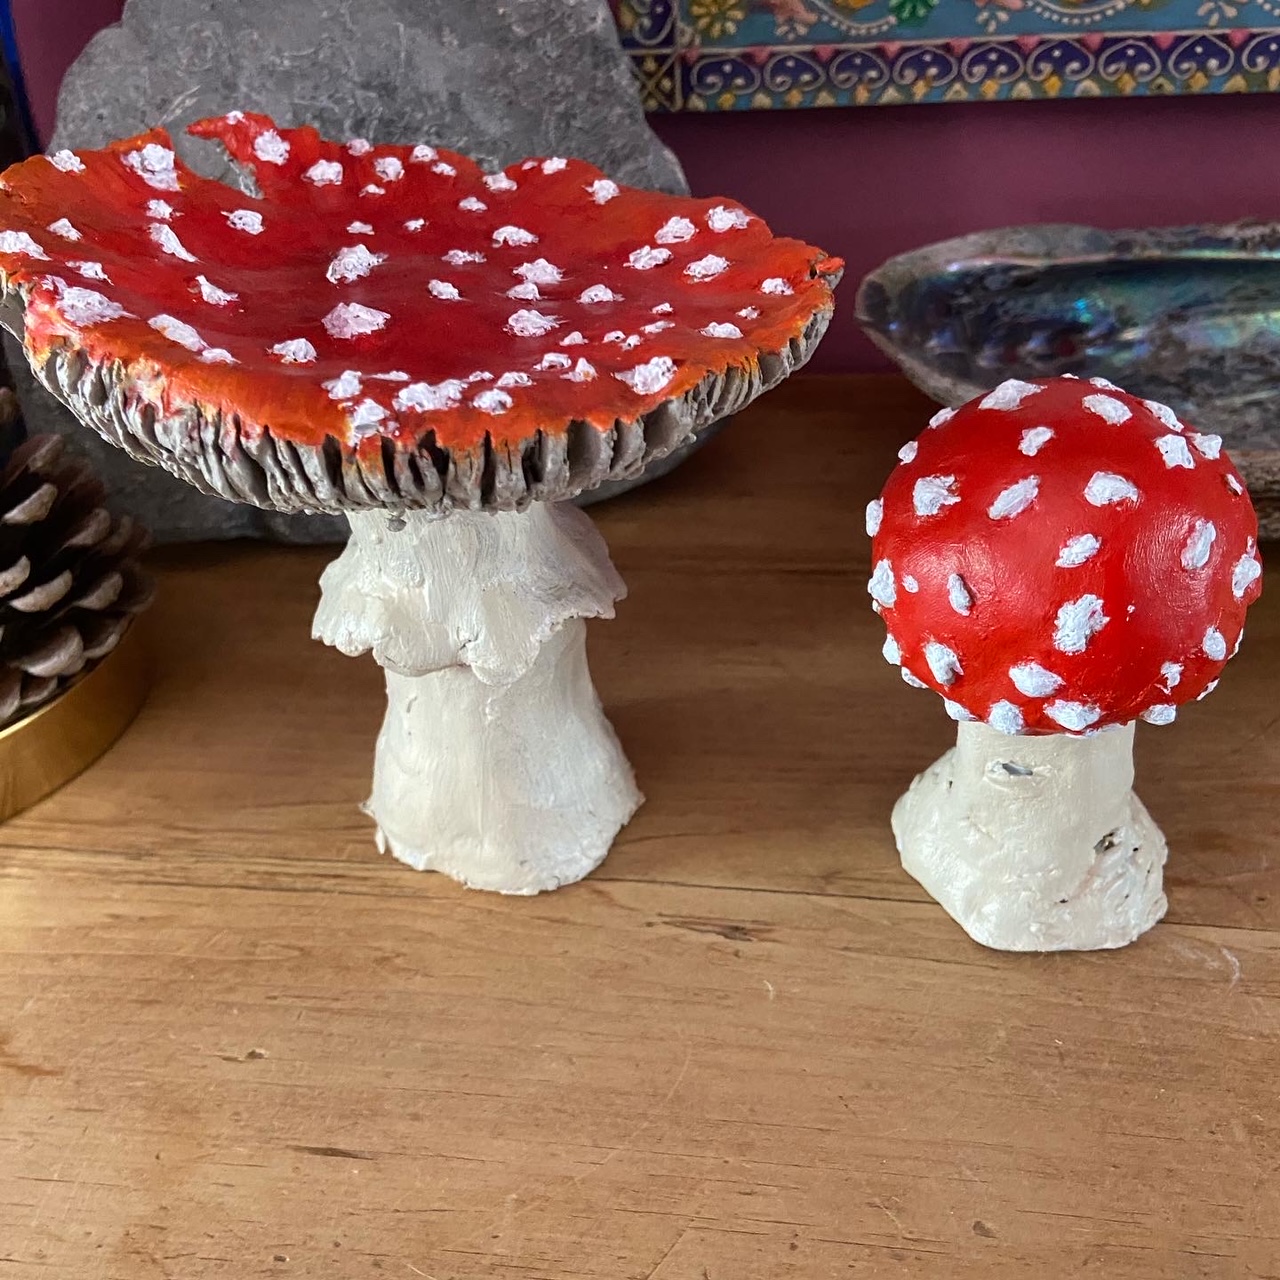 Image of two Clay, Painted Fly Agaric Mushrooms